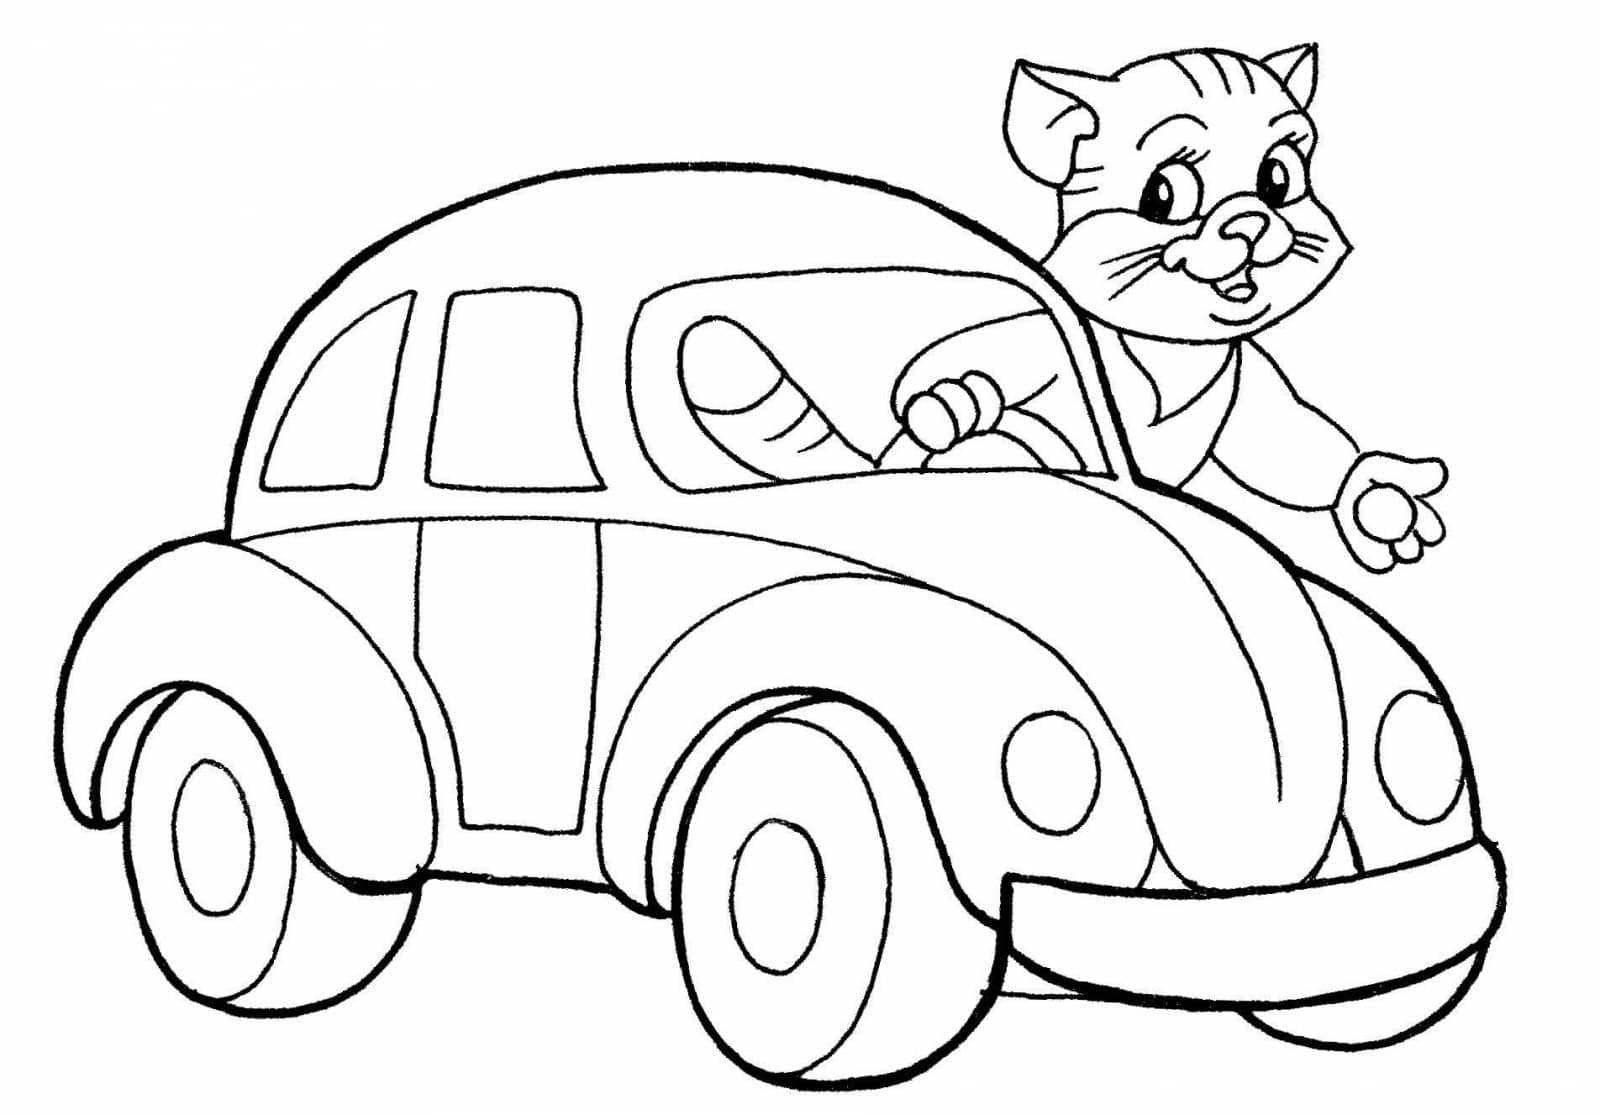 Fun coloring cars for kids 3-4 years old